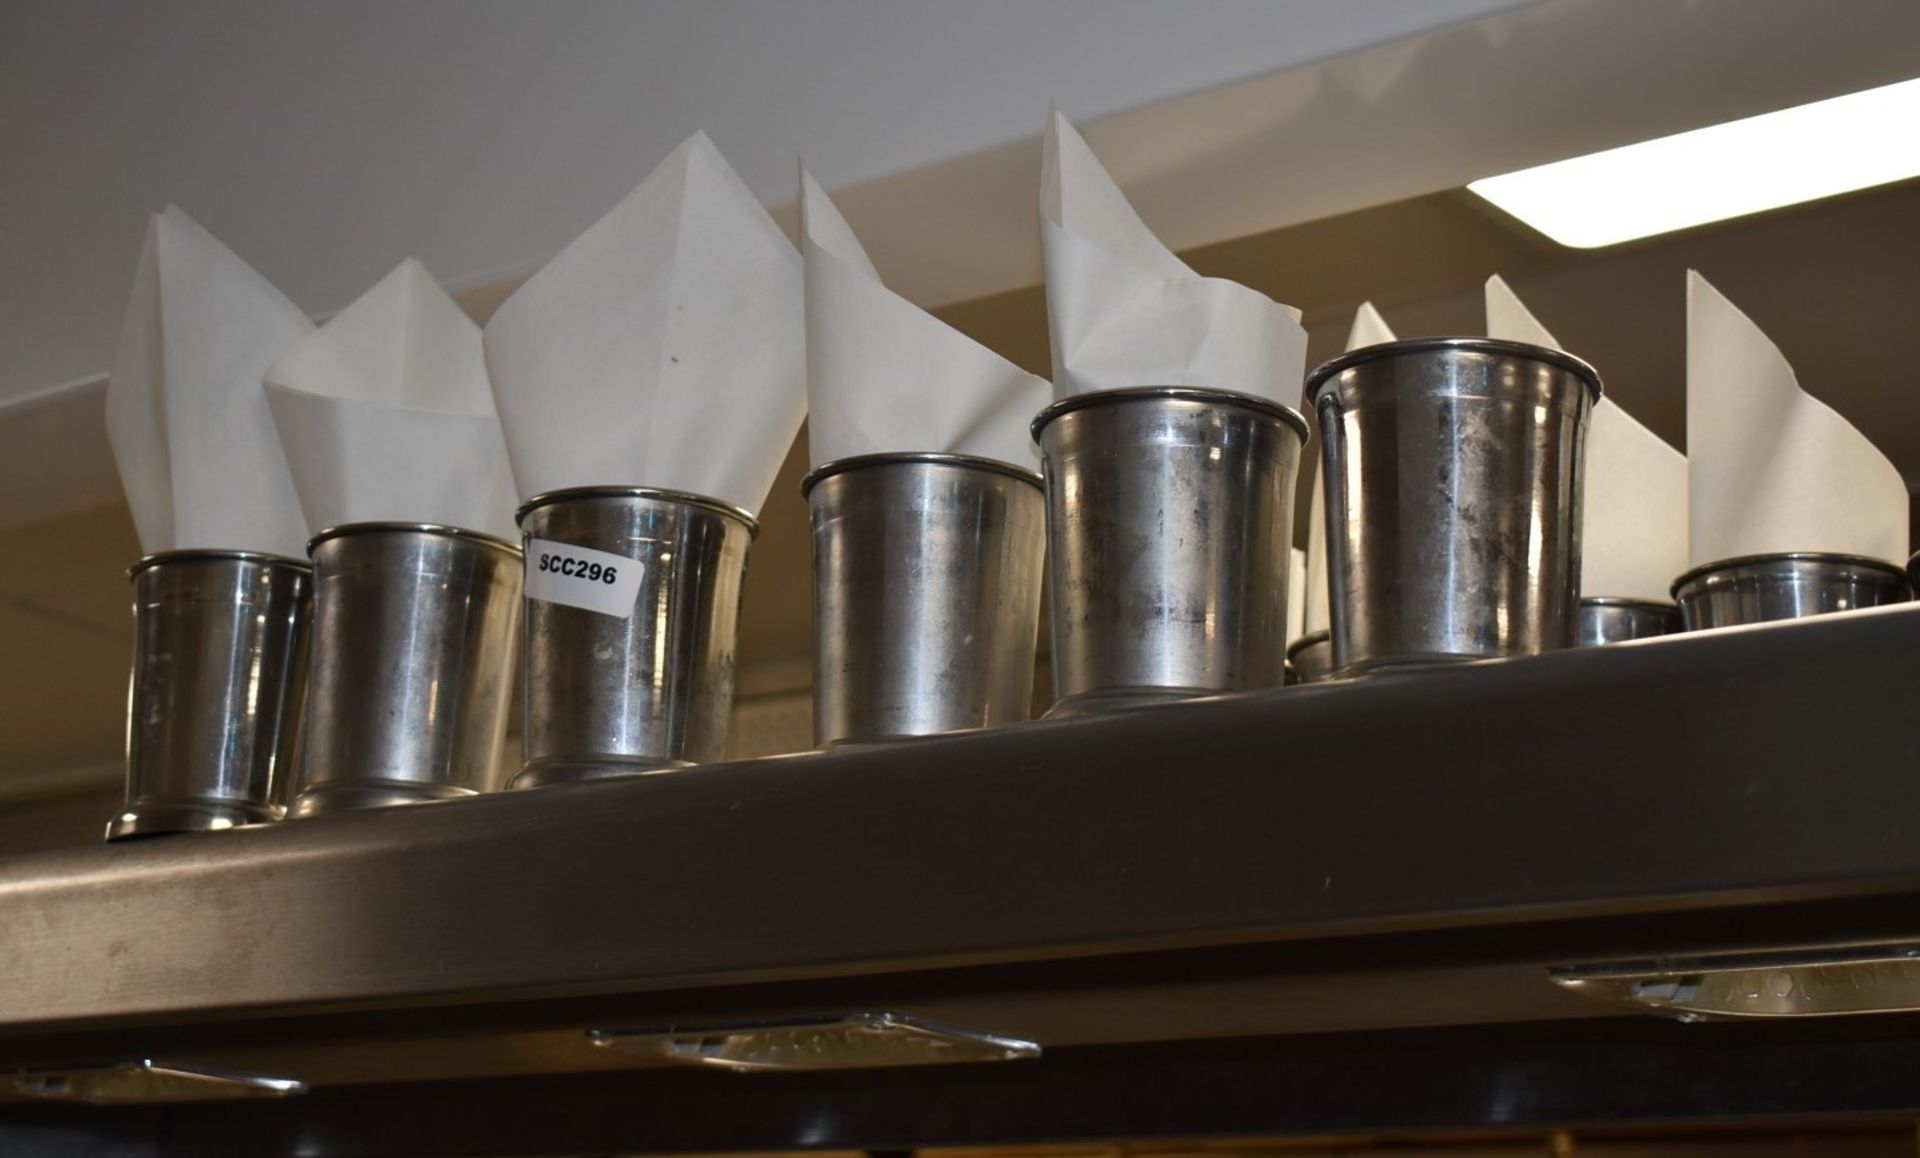 13 x Restaurant Chip Serving Buckets With Napkins By Mexclar - Stainless Steel Finish - Image 6 of 6